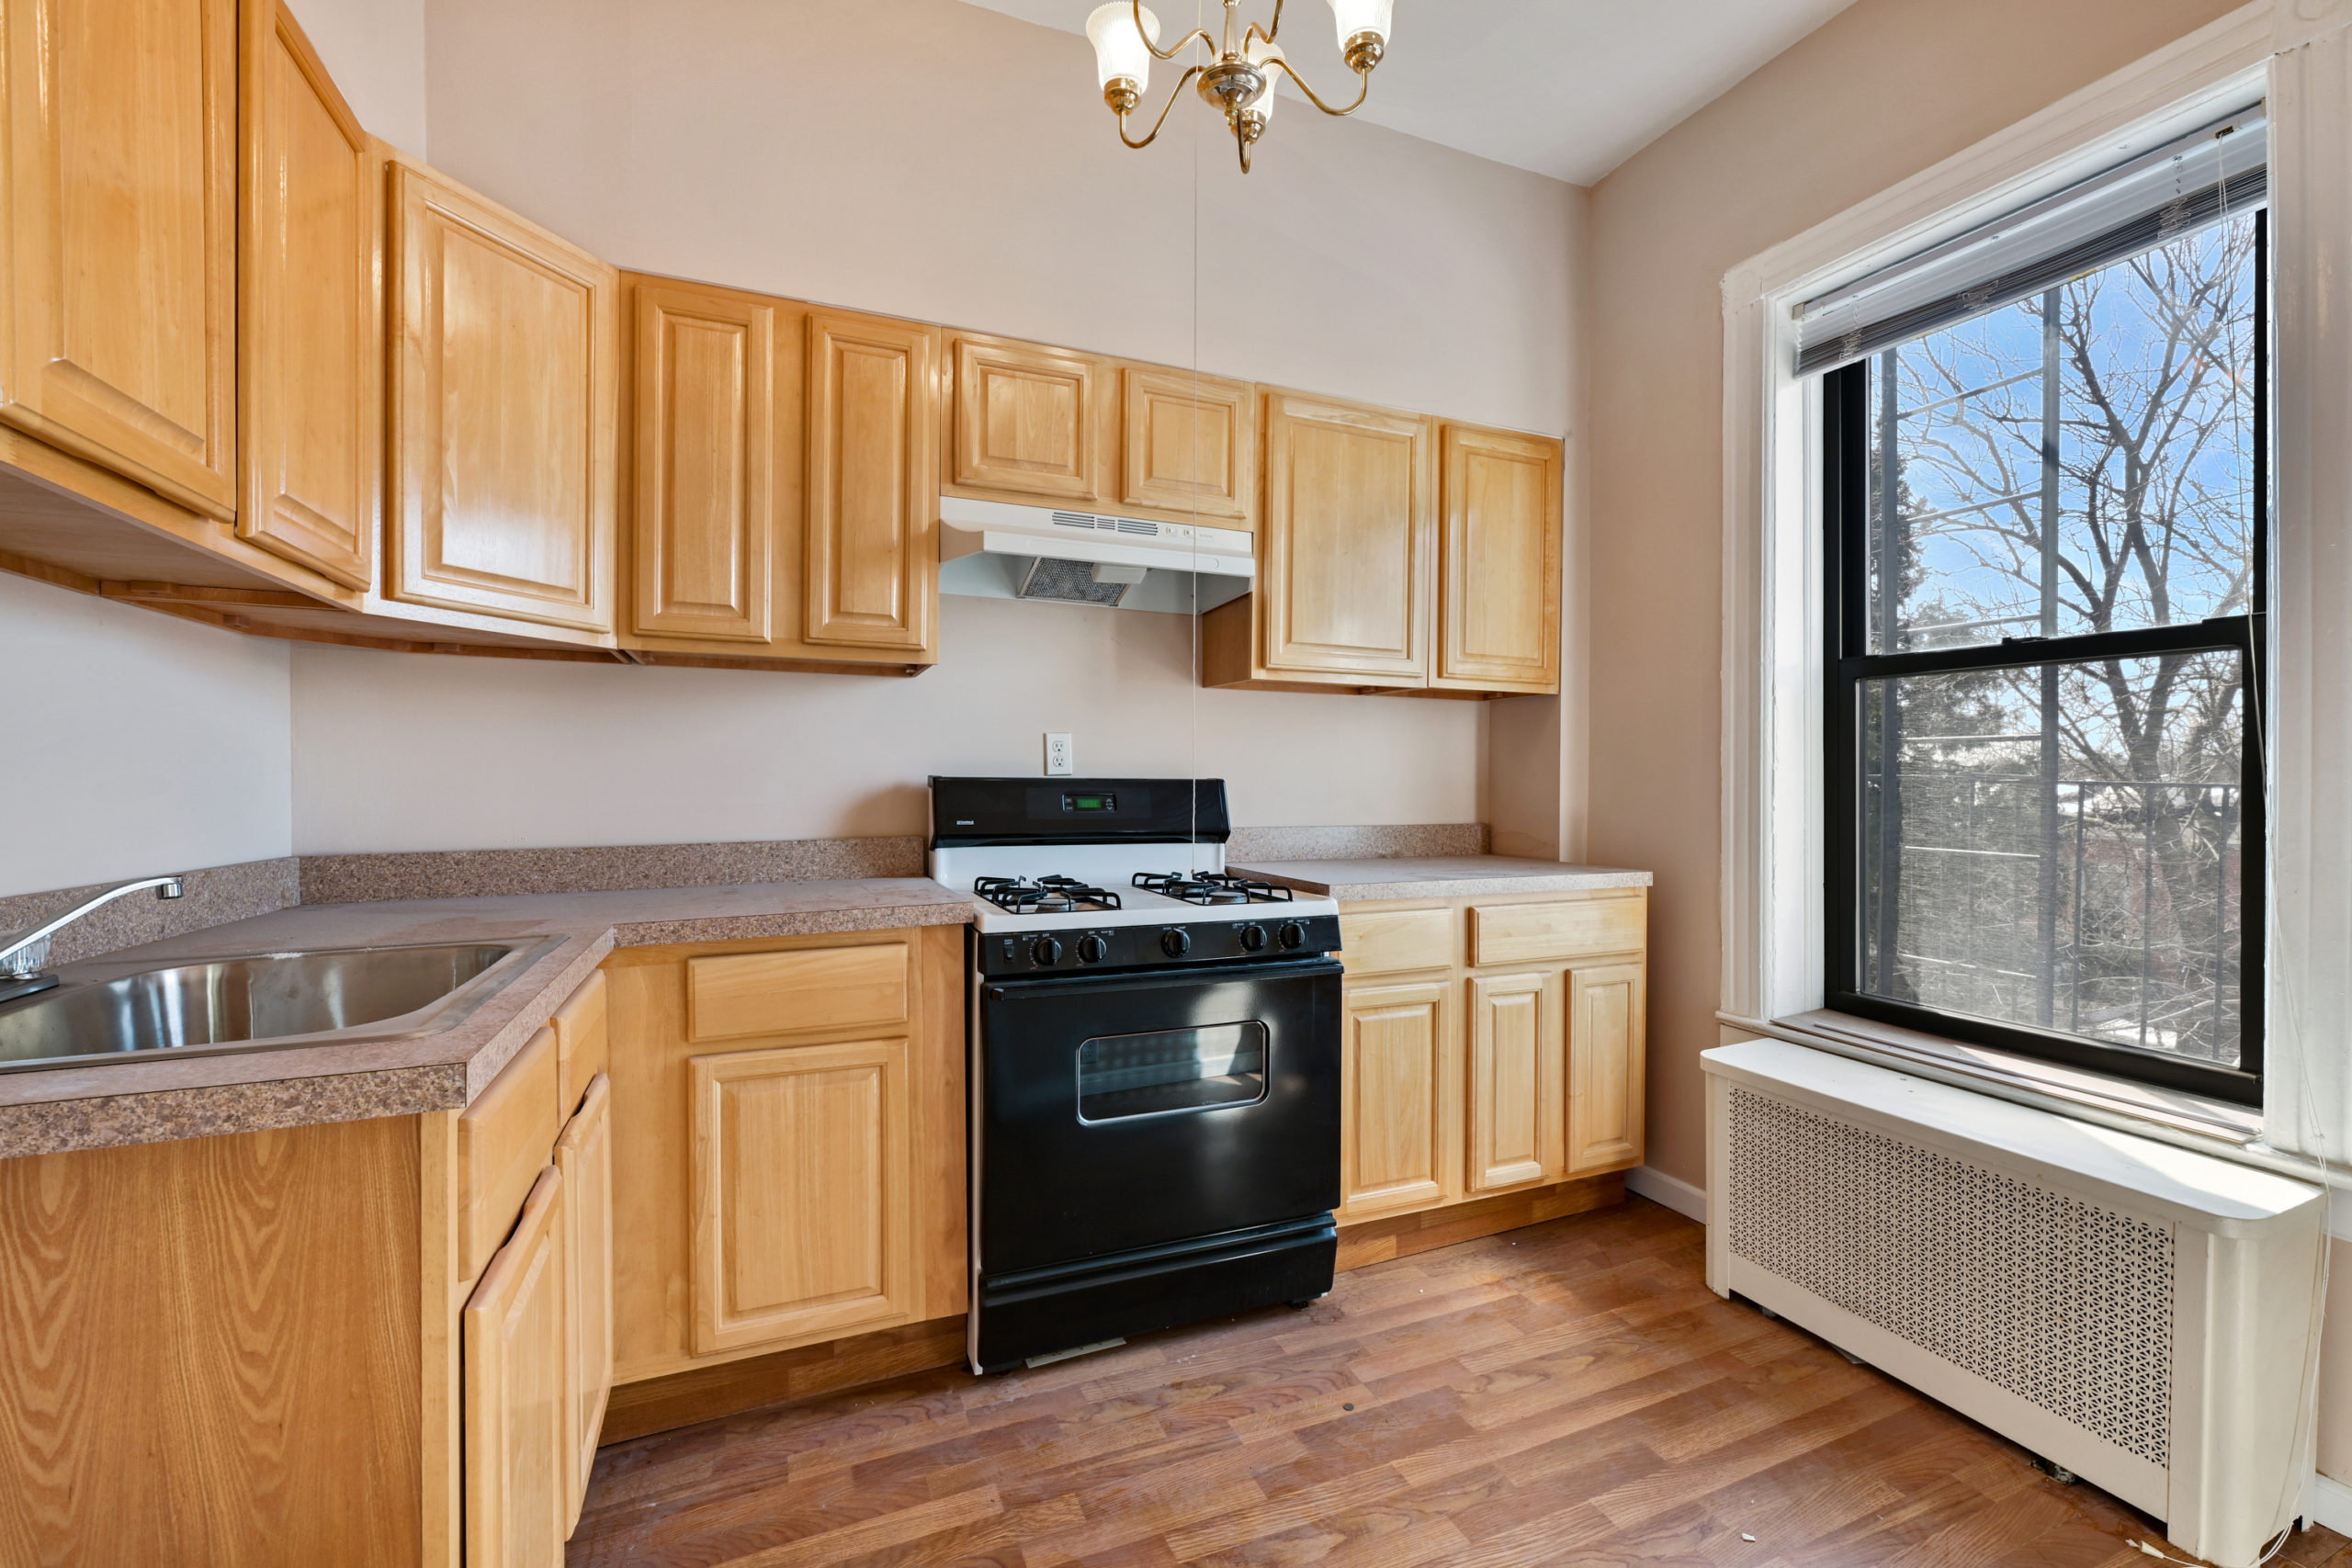 Kitchen of fabulous 3-family Townhouse in Sunset Park, Brooklyn for sale -- Kingsley Real Estate, Staten Island, New York